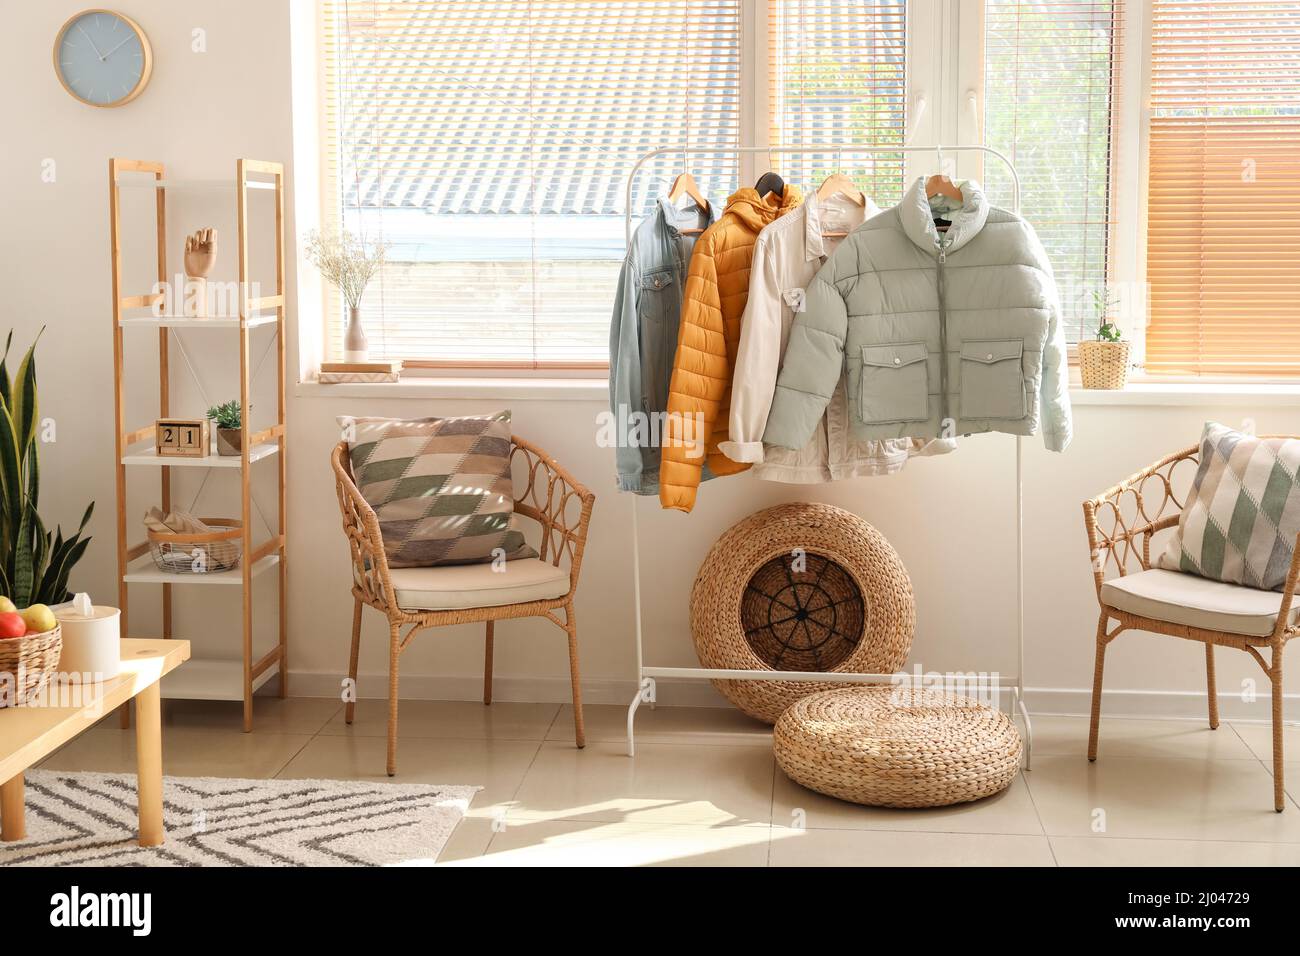 Interior of light room with armchair, shelving unit and warm jackets Stock Photo